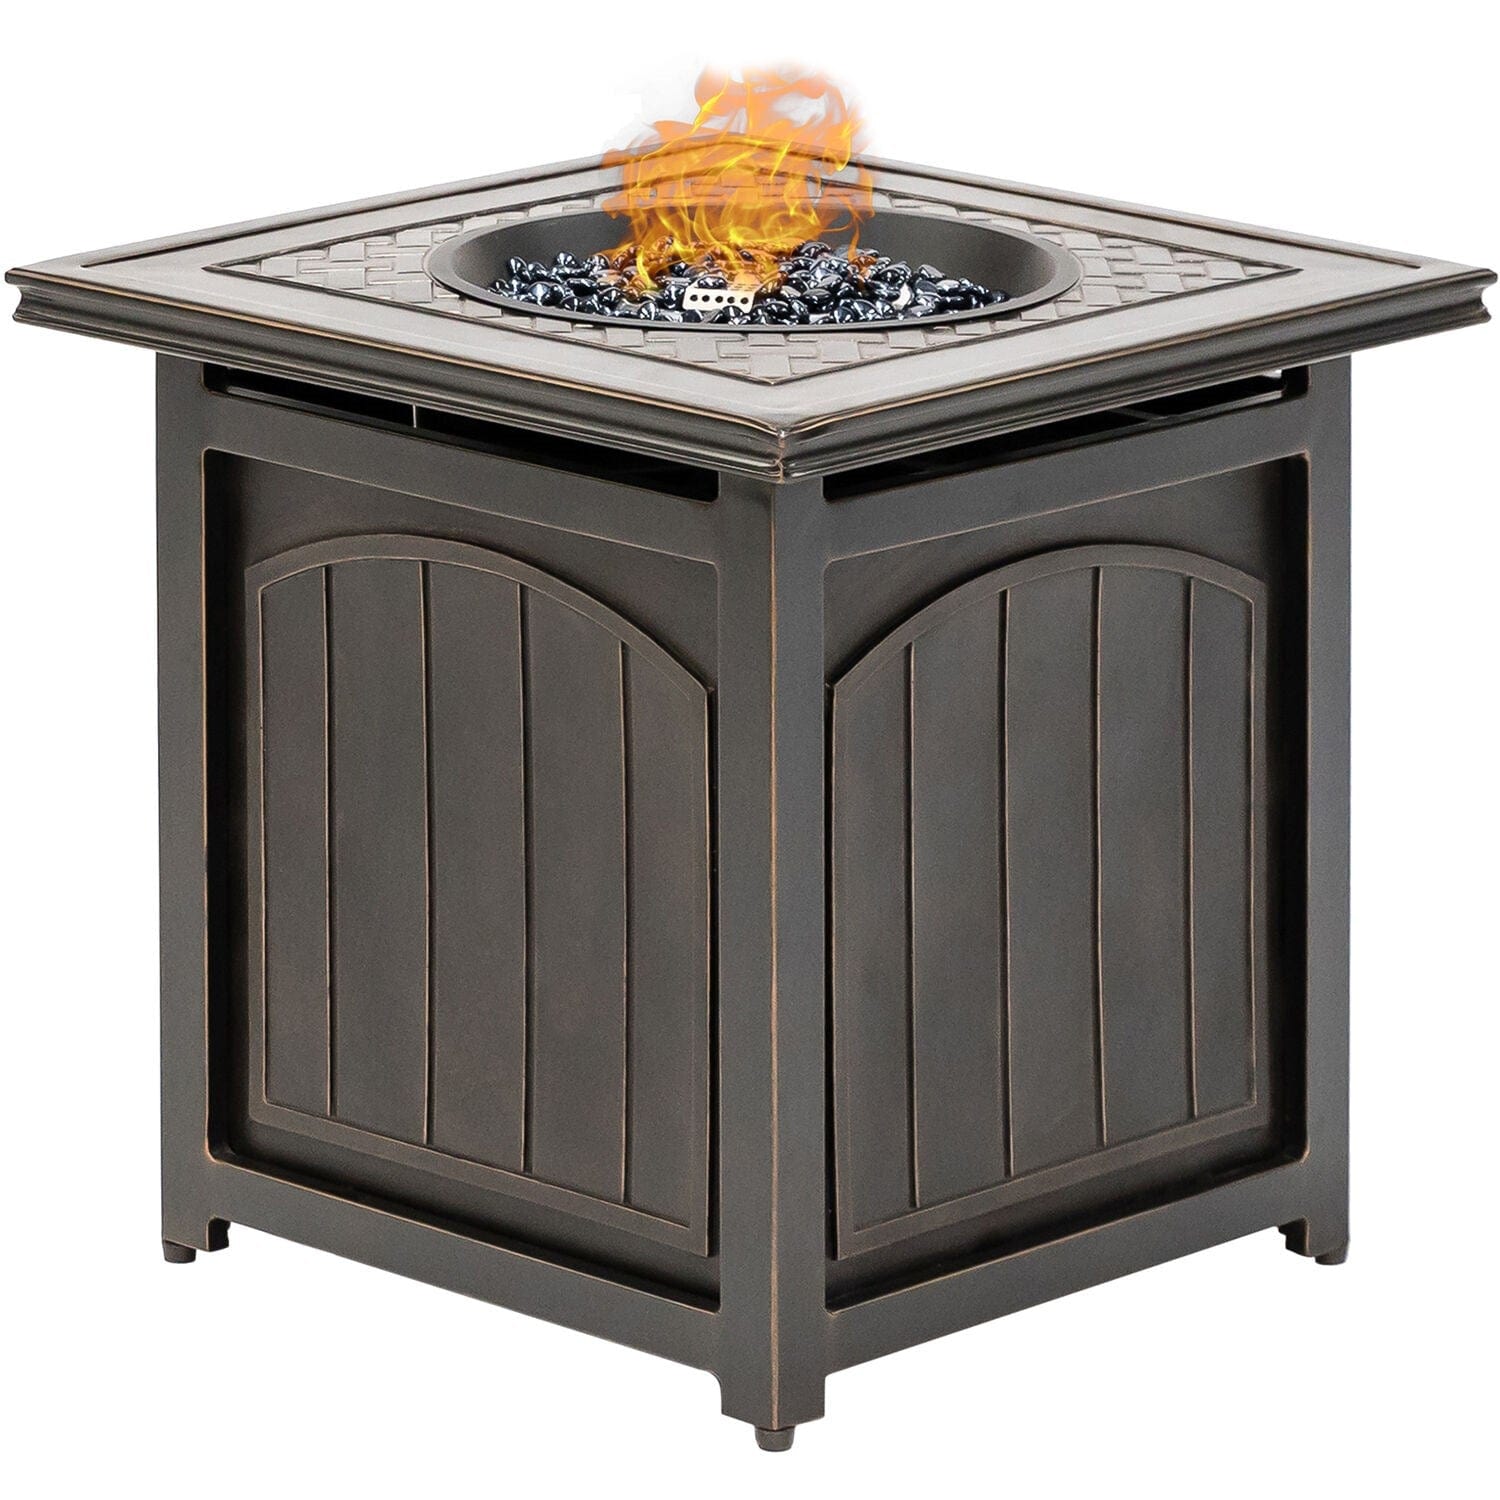 Hanover Fire Pit Chat Set Hanover - Traditions5pc: 4 Deep Seating Rkrs and 26" Square Fire Pit | TRAD5PCFPSQ-TAN